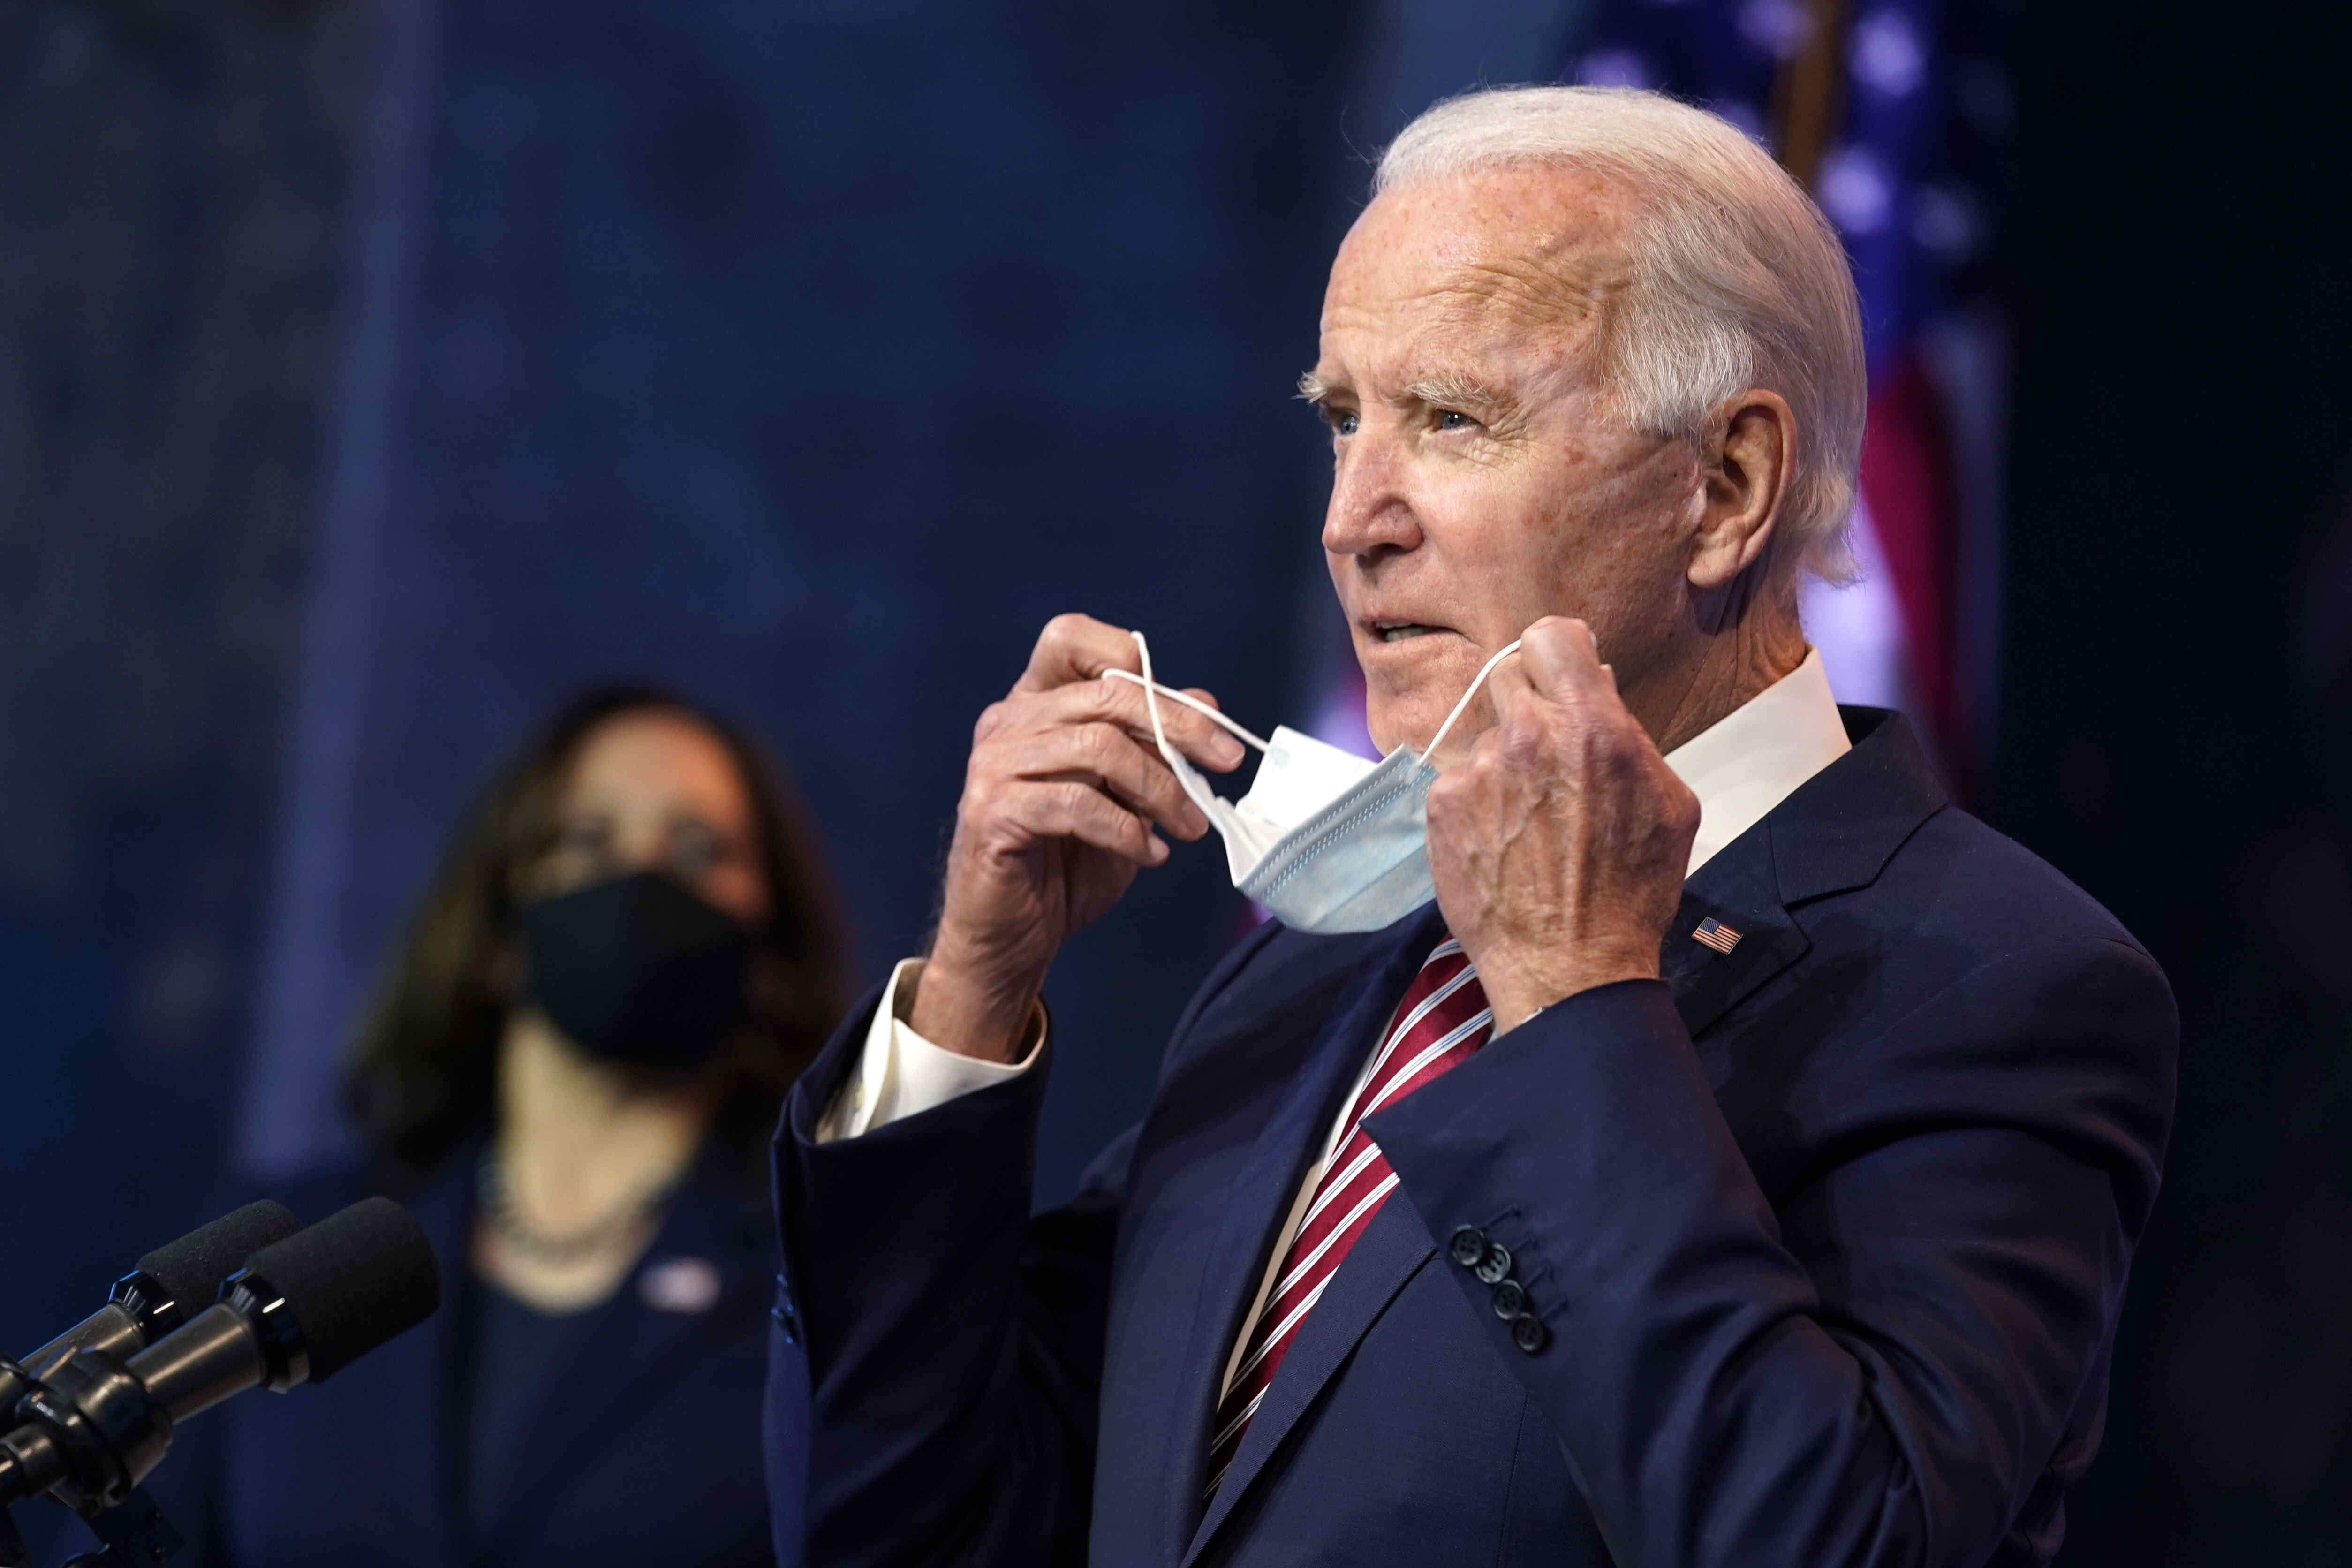 Biden says remark on Putins power was about moral outrage, no change in US policy